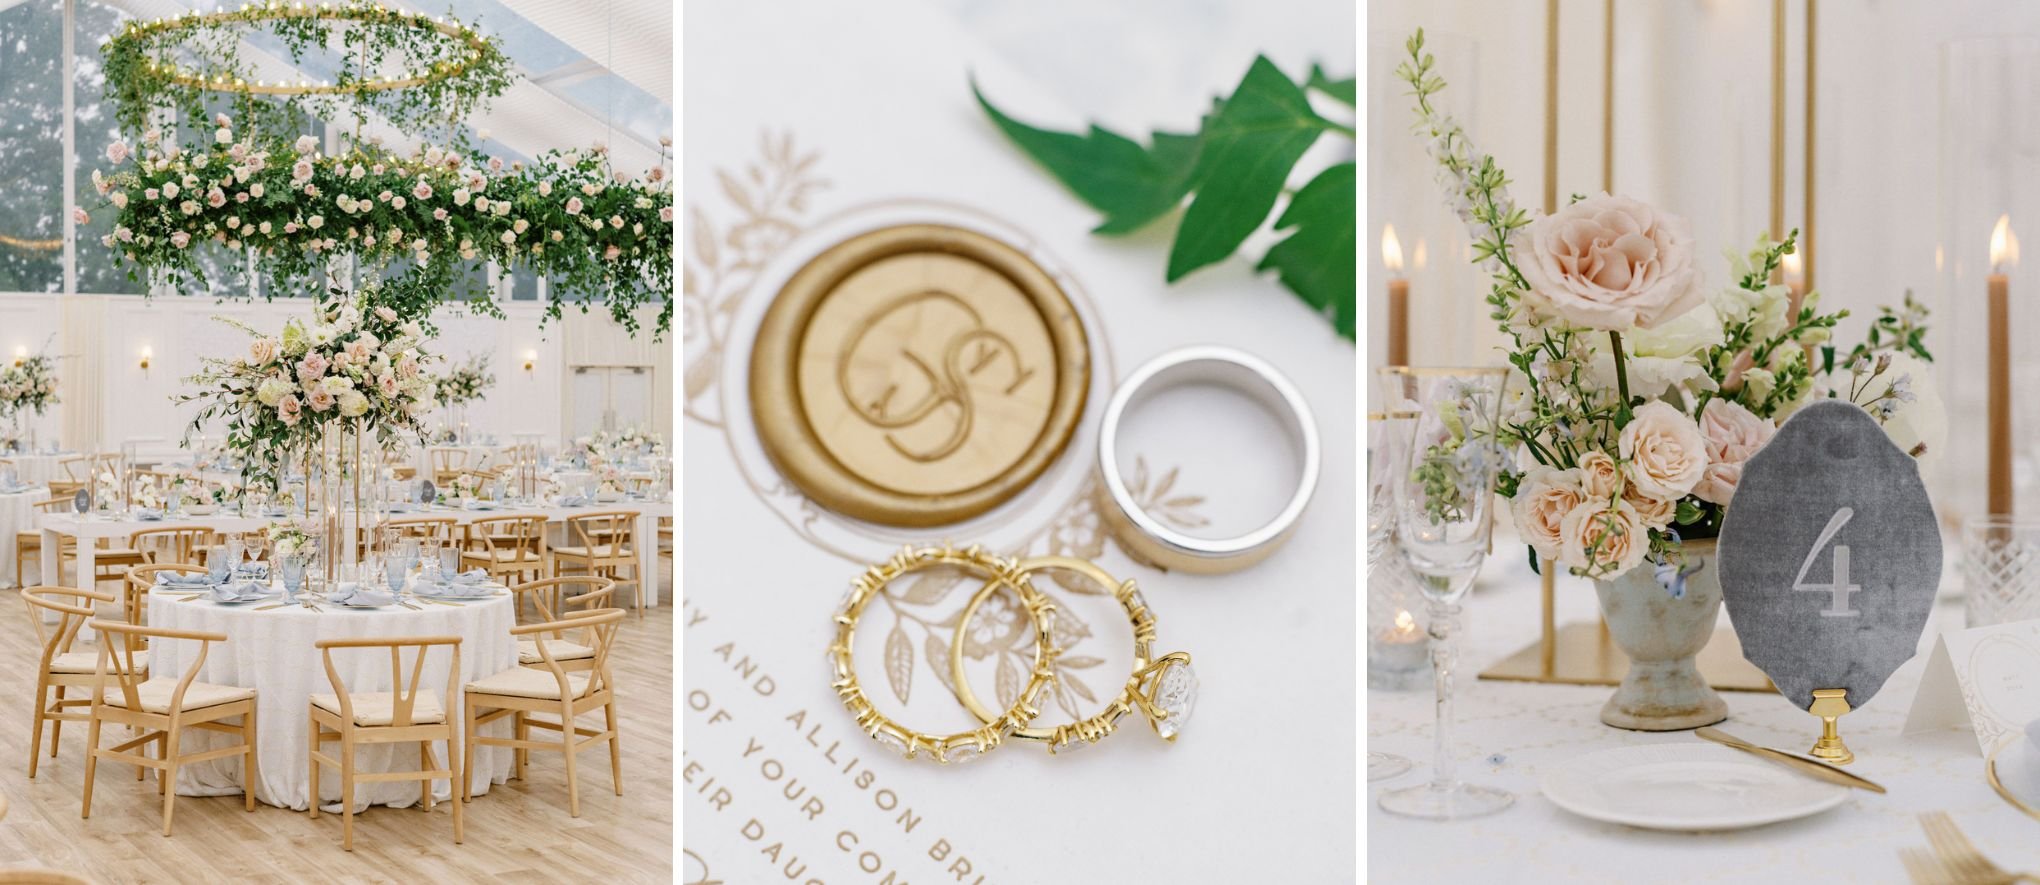 Details by Traverse City wedding planner 